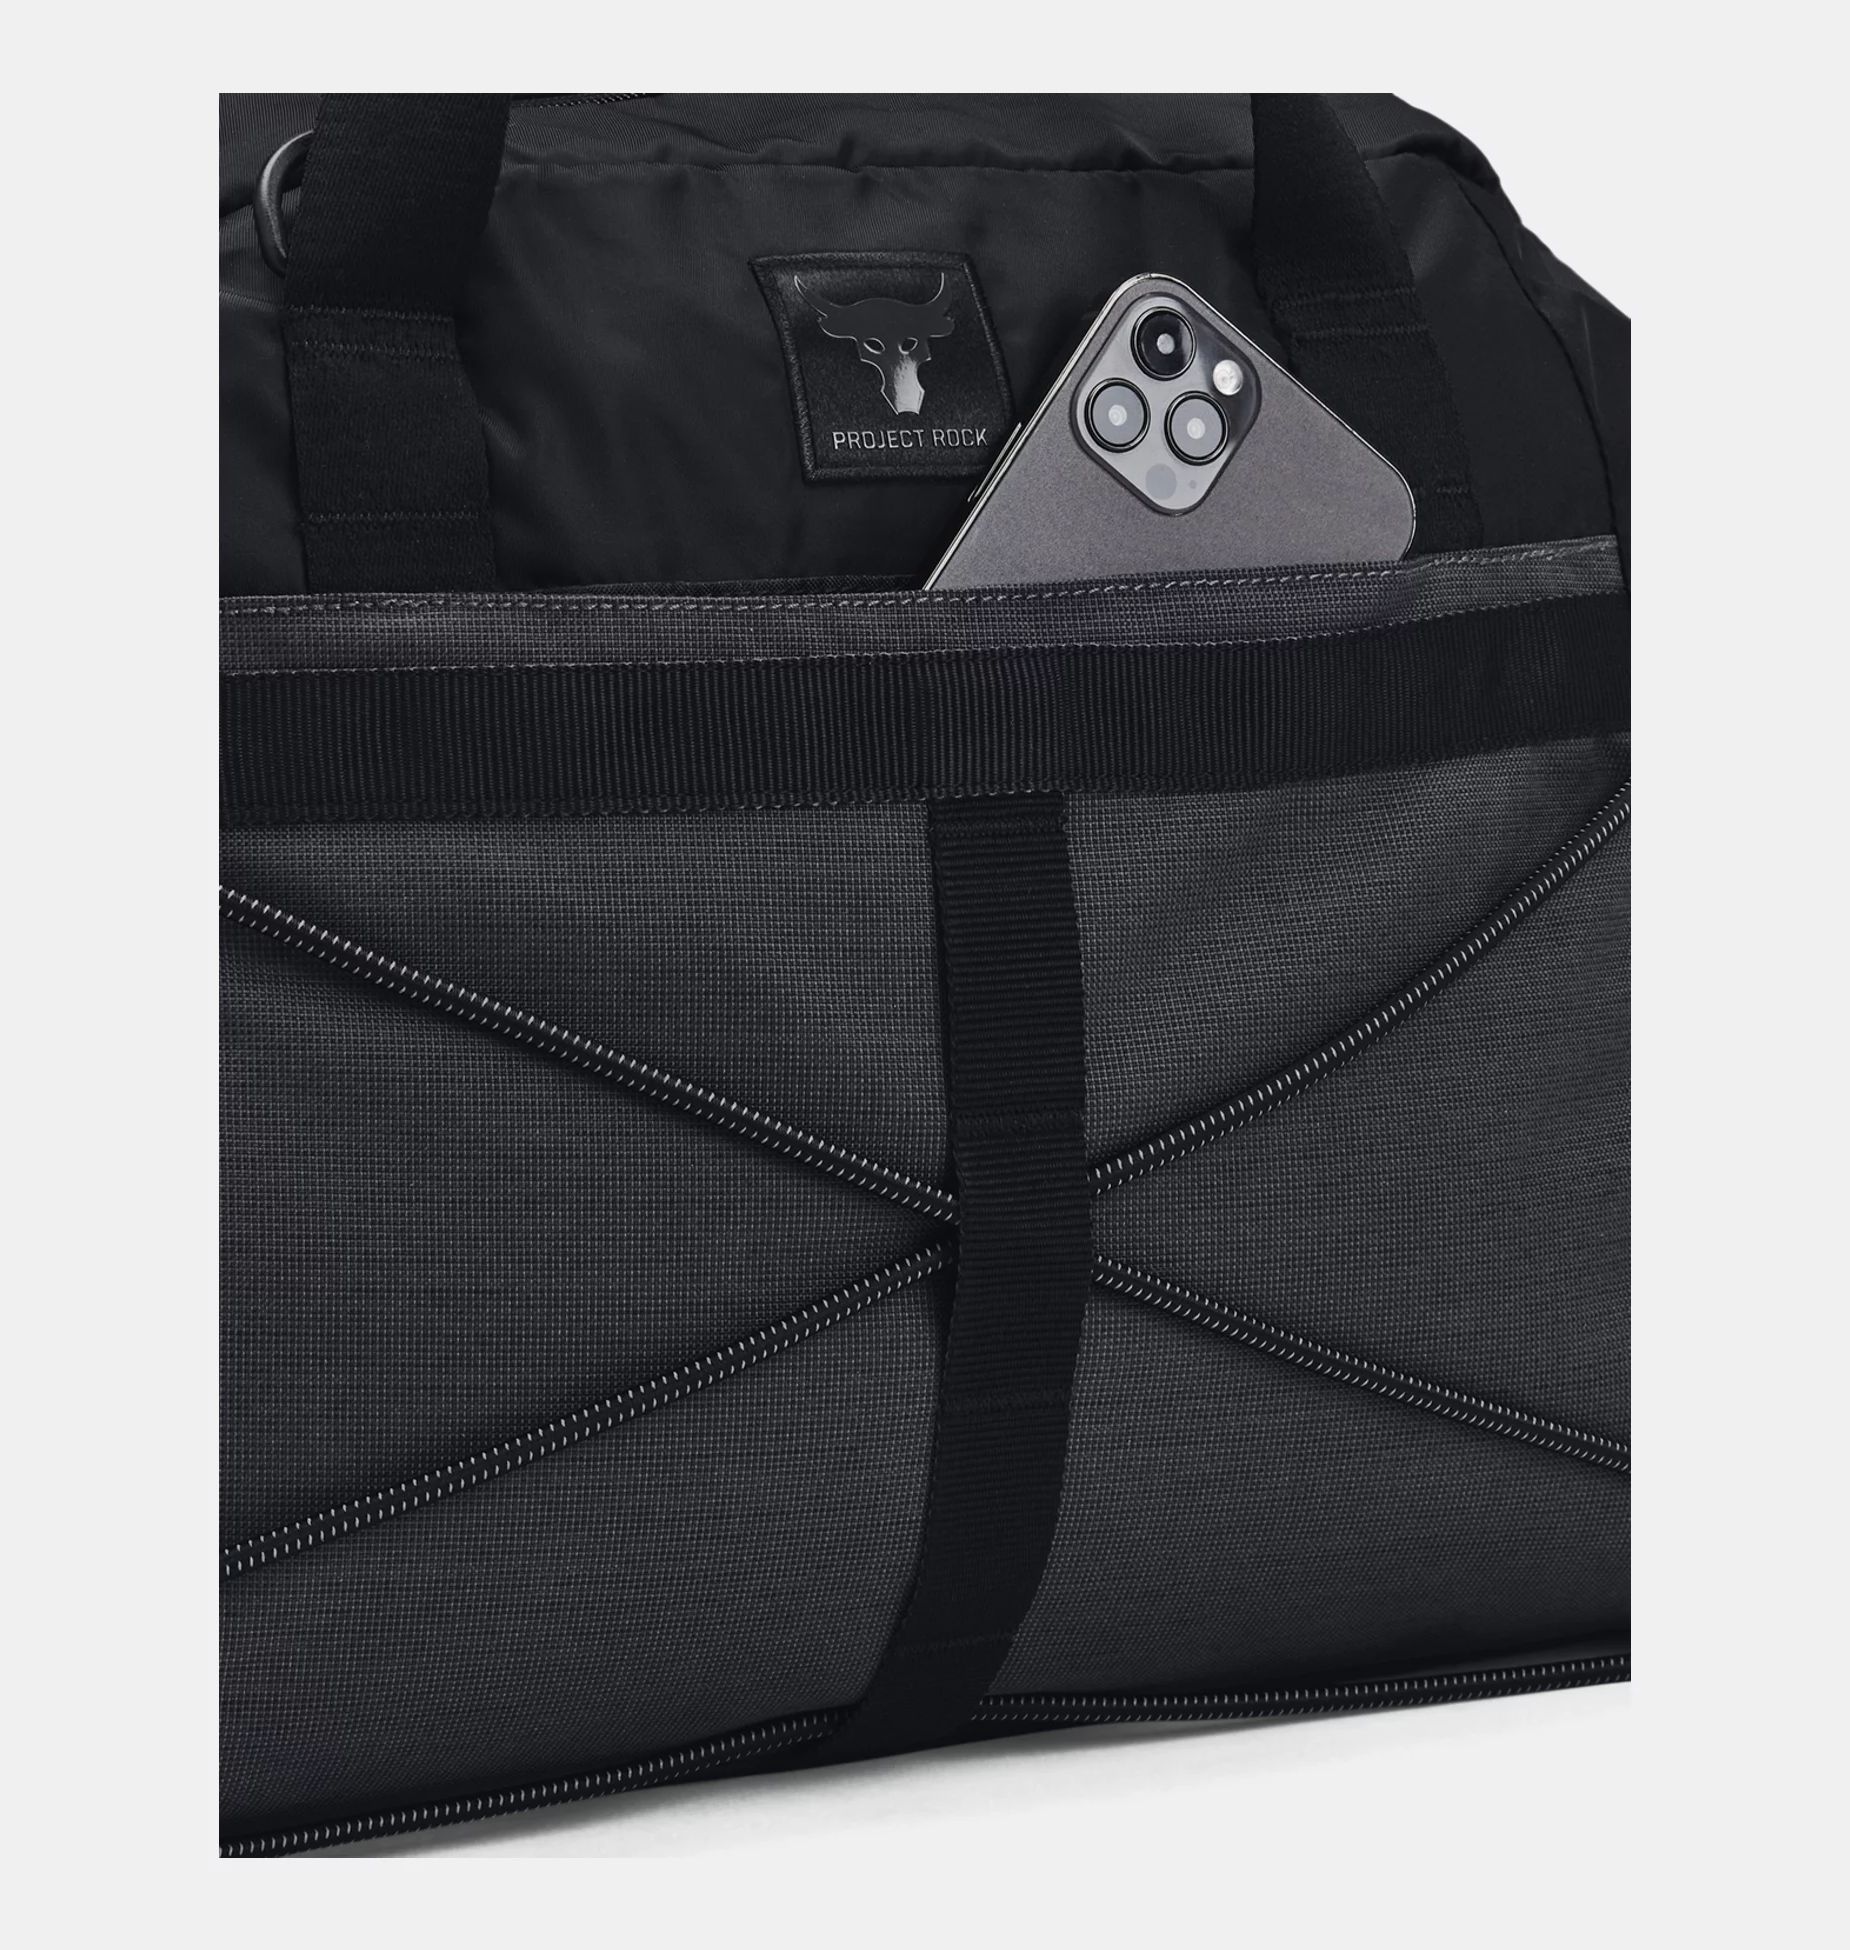 Bagpacks -  under armour Project Rock Small Gym Bag